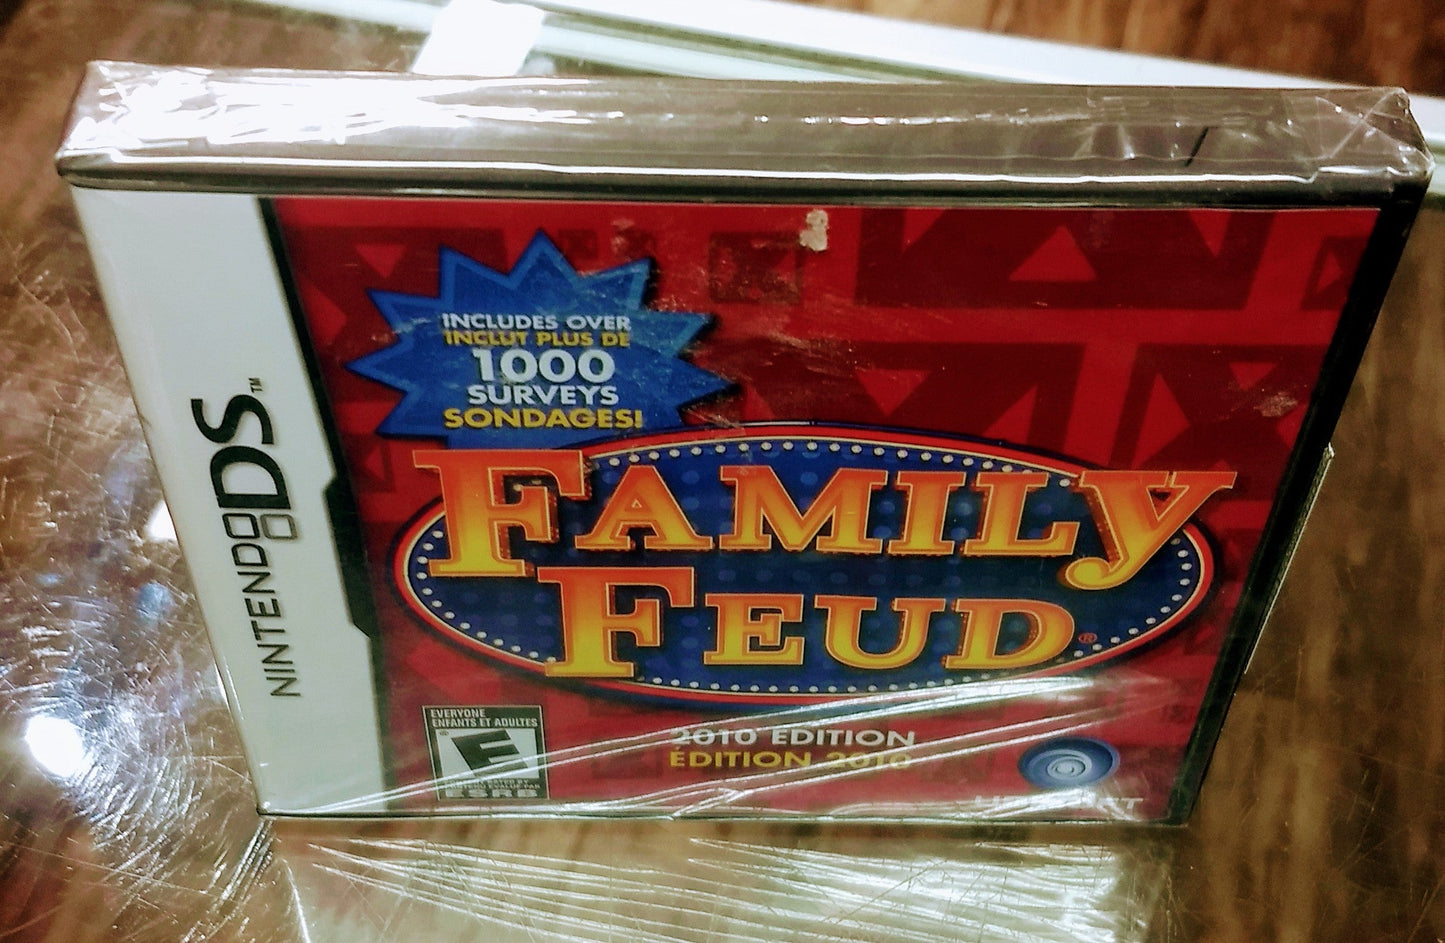 FAMILY FEUD: 2010 EDITION NINTENDO DS